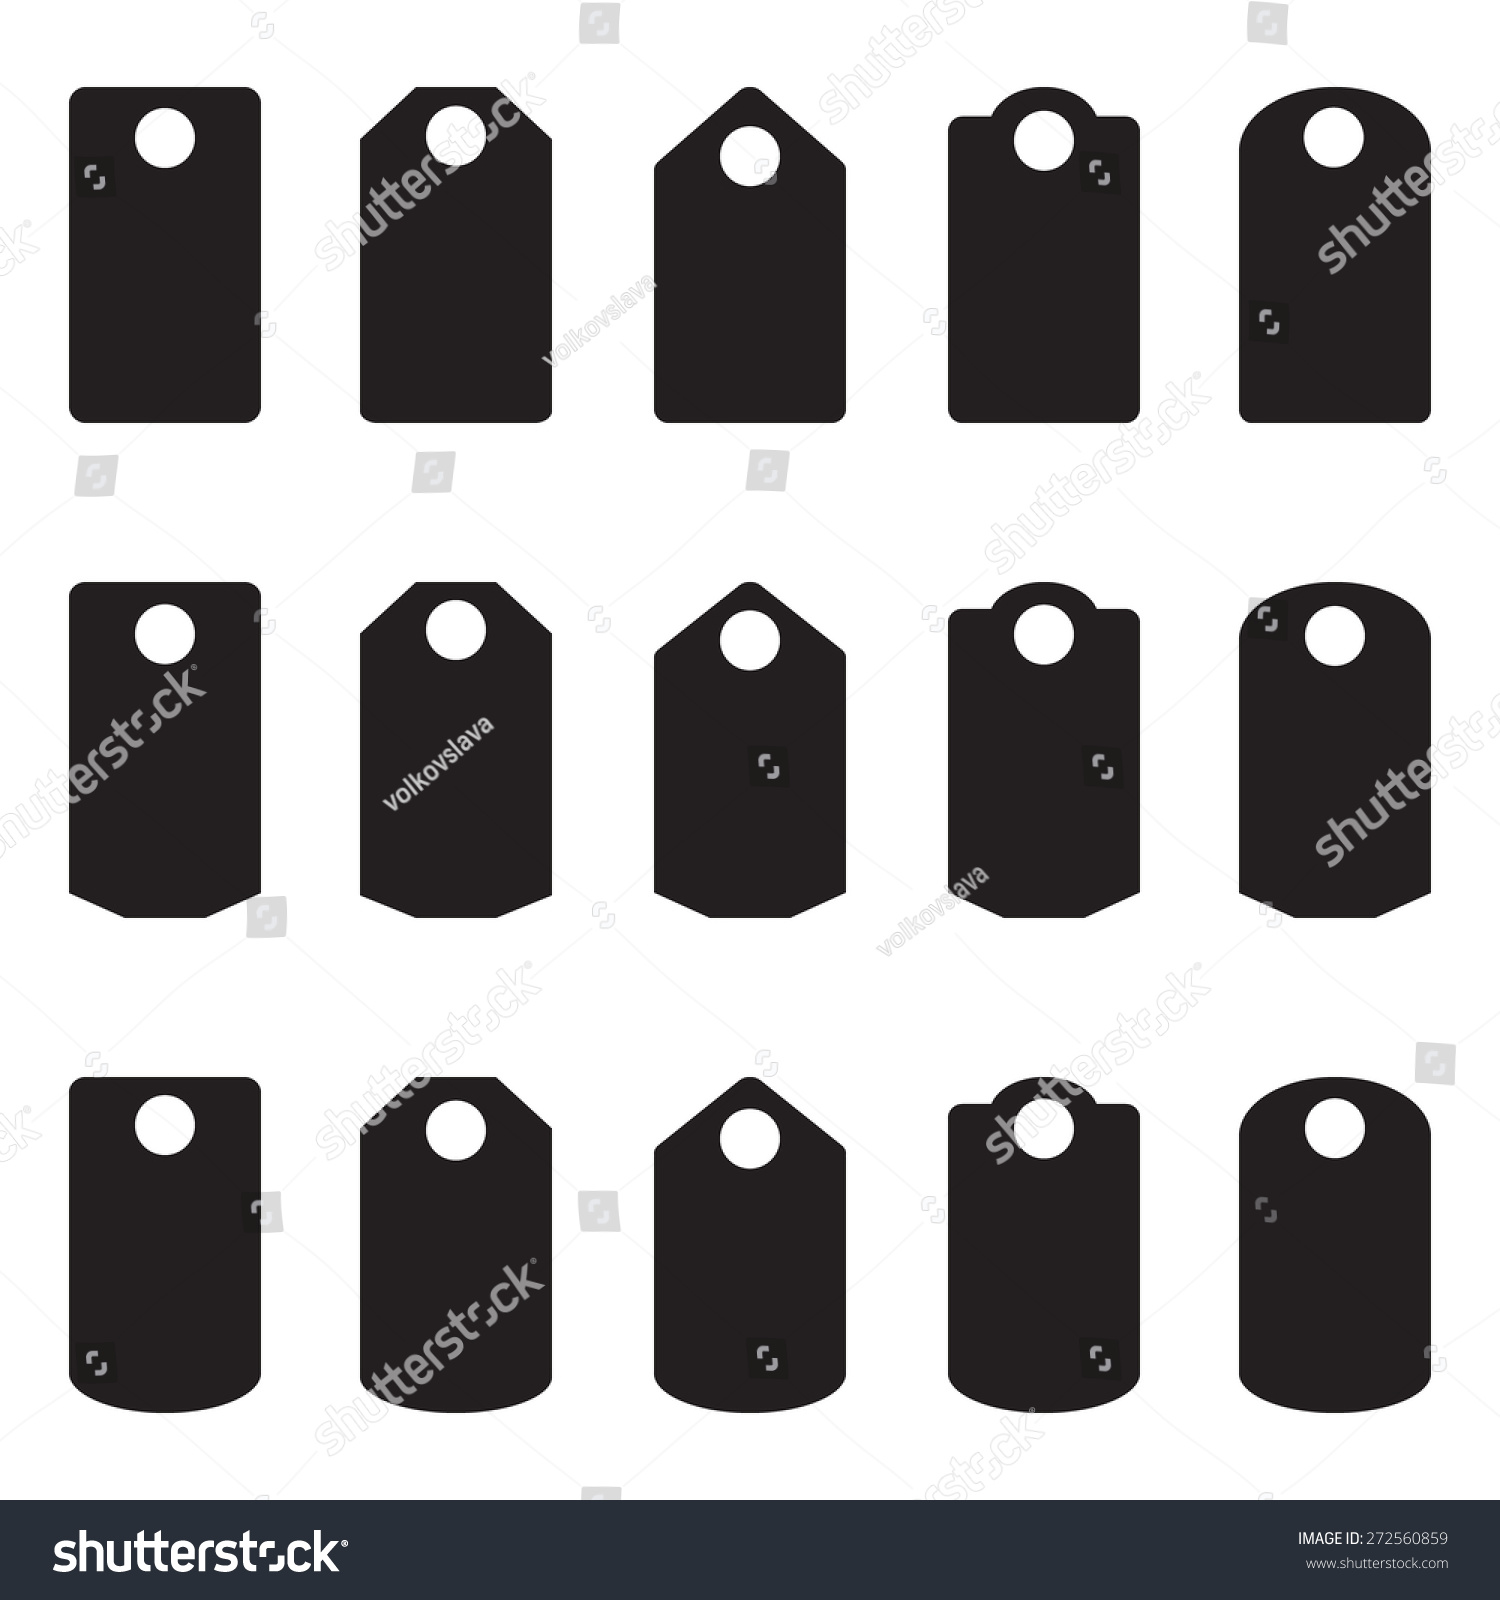 Blank Labels Template from image.shutterstock.com